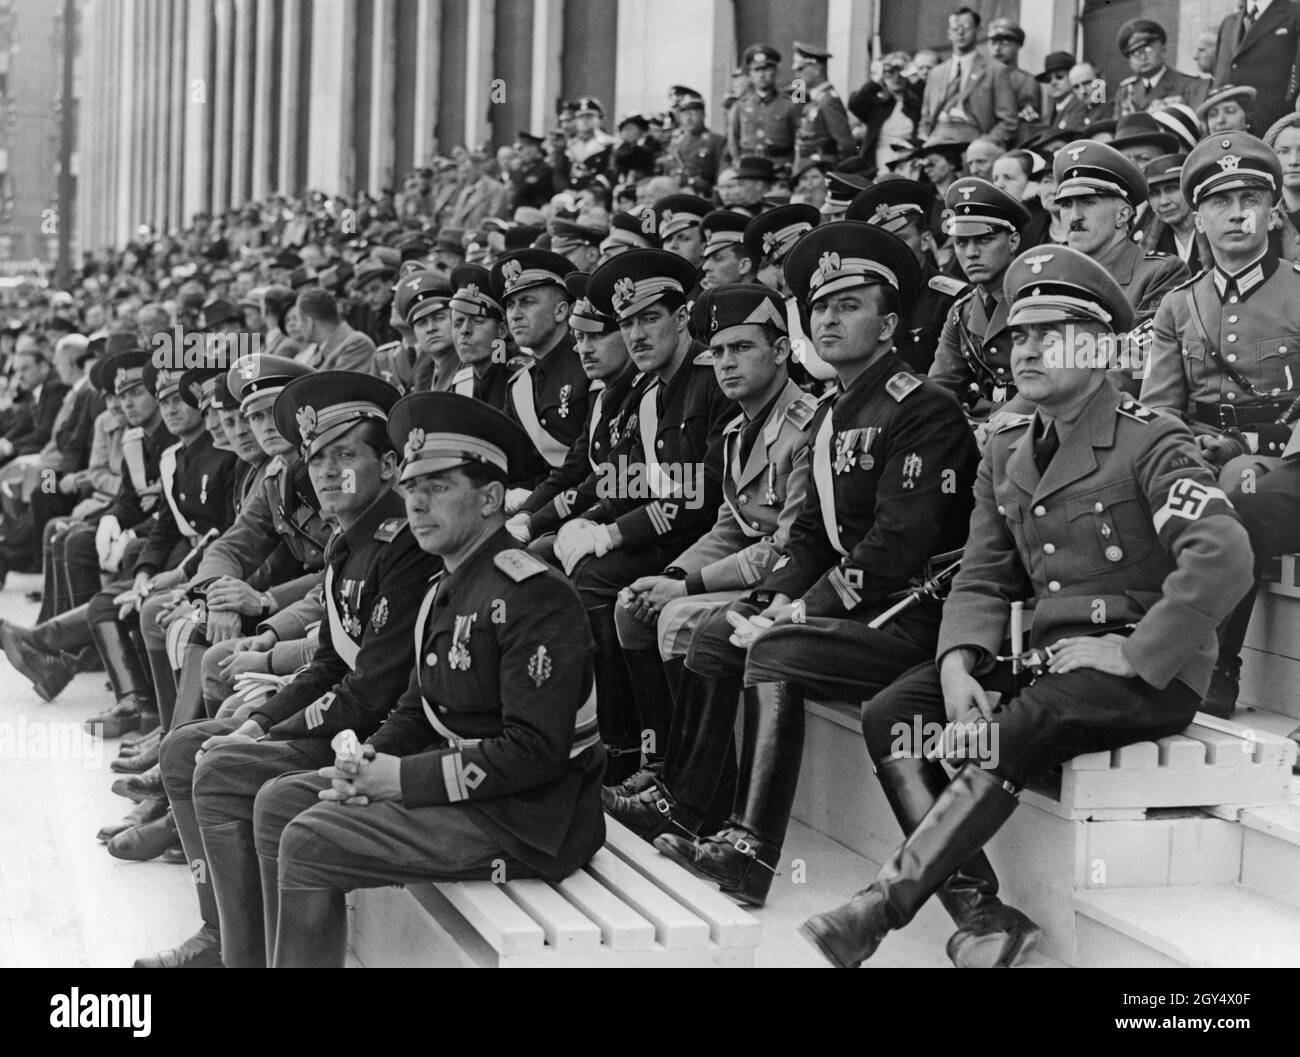 'On May 1, 1937, the big rally for the ''National Holiday of the German People'' took place in Berlin-Mitte. On a grandstand in the Lustgarten, Italian Balilla officers (black uniforms) from the entourage of youth leader Renato Ricci watched the parade alongside HJ officers. On the far right sits an area leader of the Hitler Youth. [automated translation]' Stock Photo